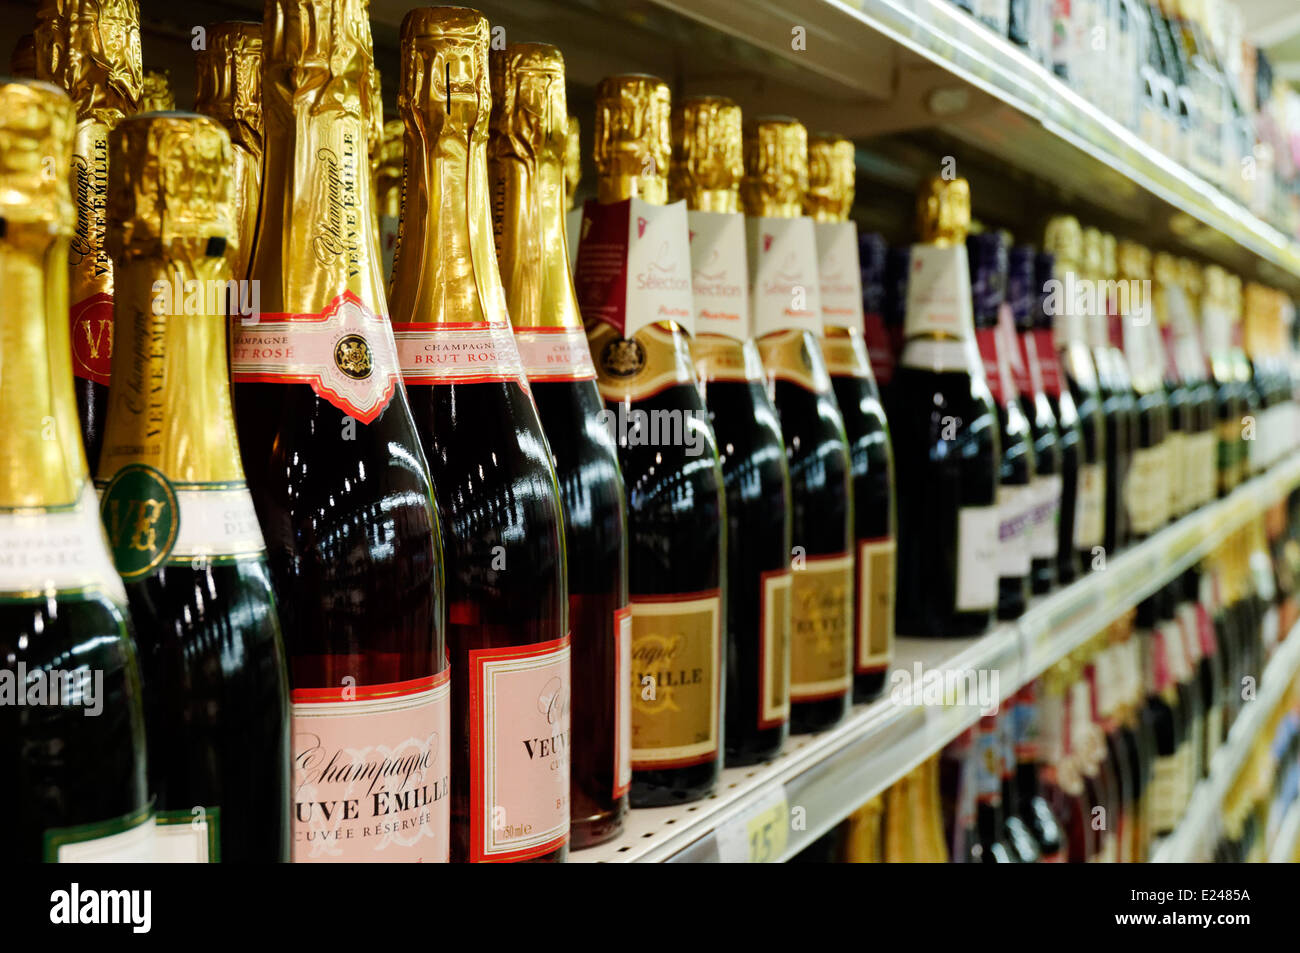 Bottles of Champagne on the shelves of a supermarket in France Stock Photo